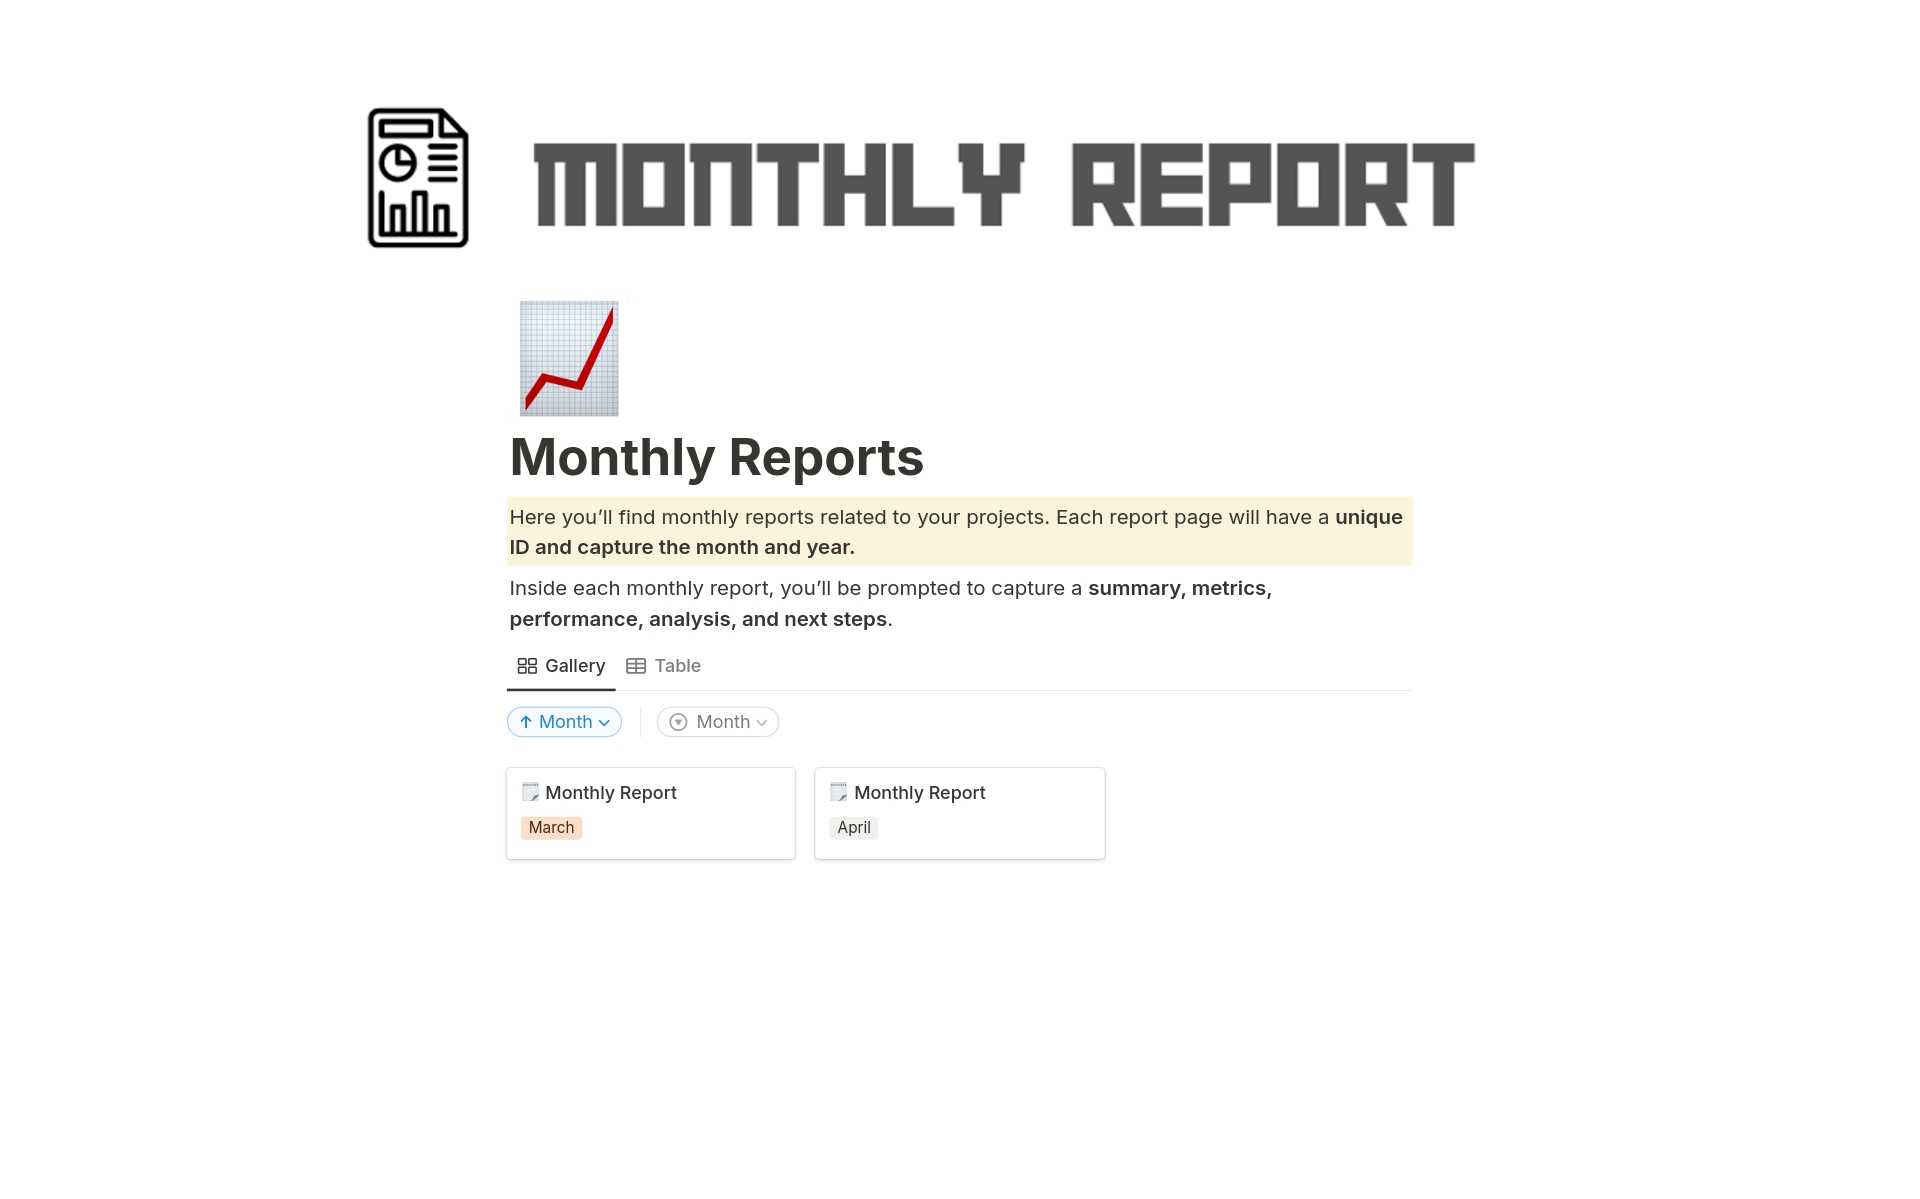 This Notion setup functions as a central hub for your monthly reports. It combines a database to store historical data with a customizable report page template.